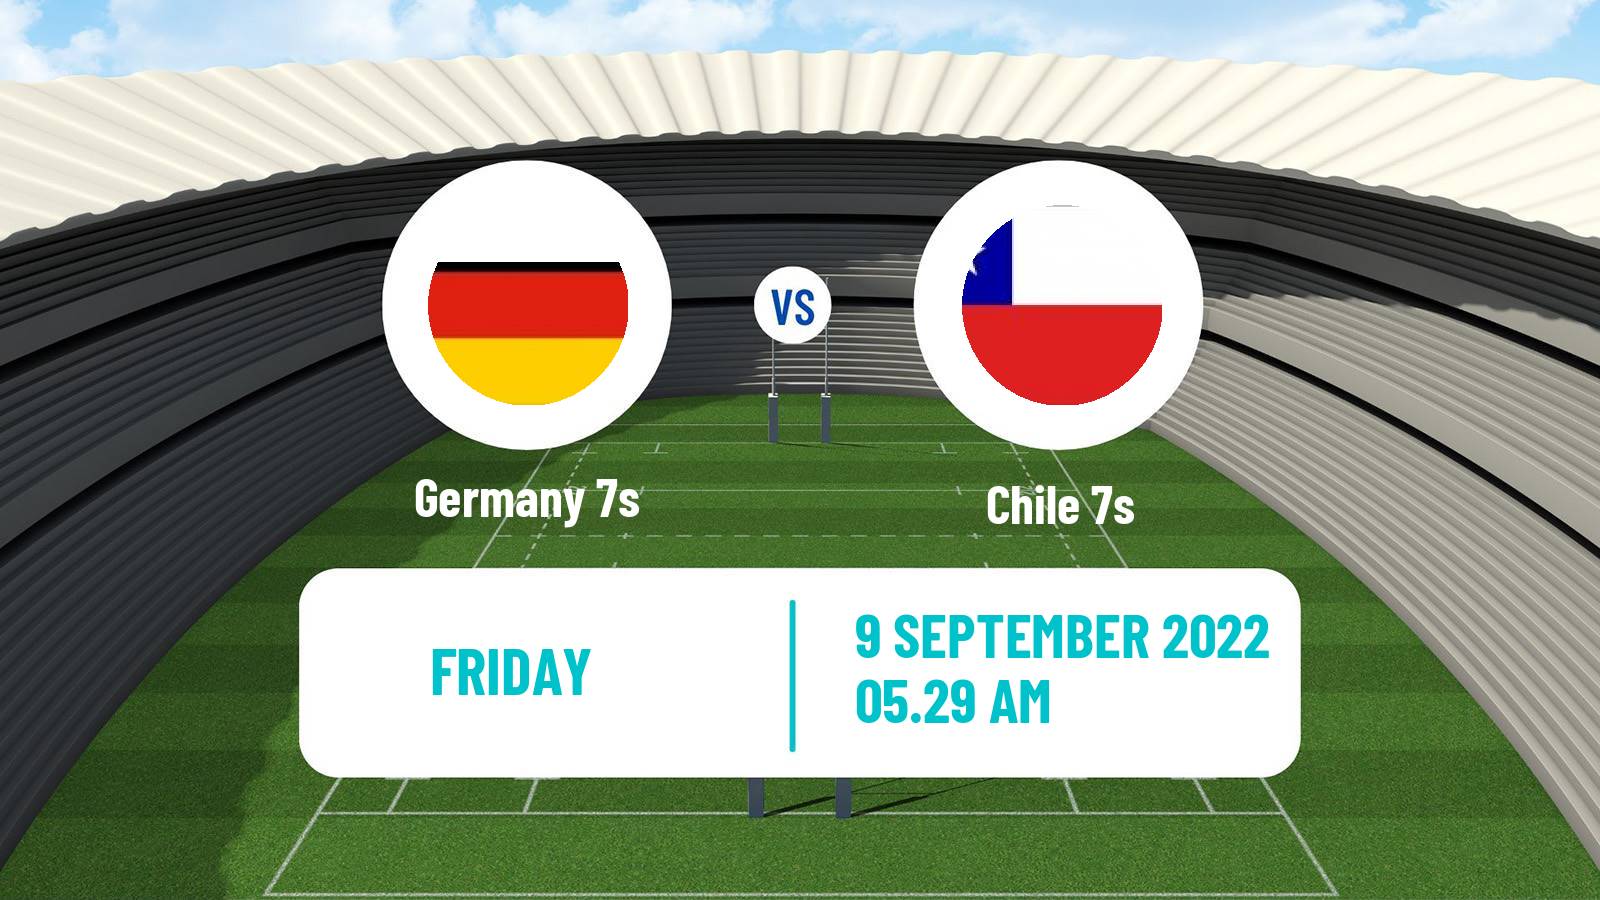 Rugby union Sevens World Cup Germany 7s - Chile 7s